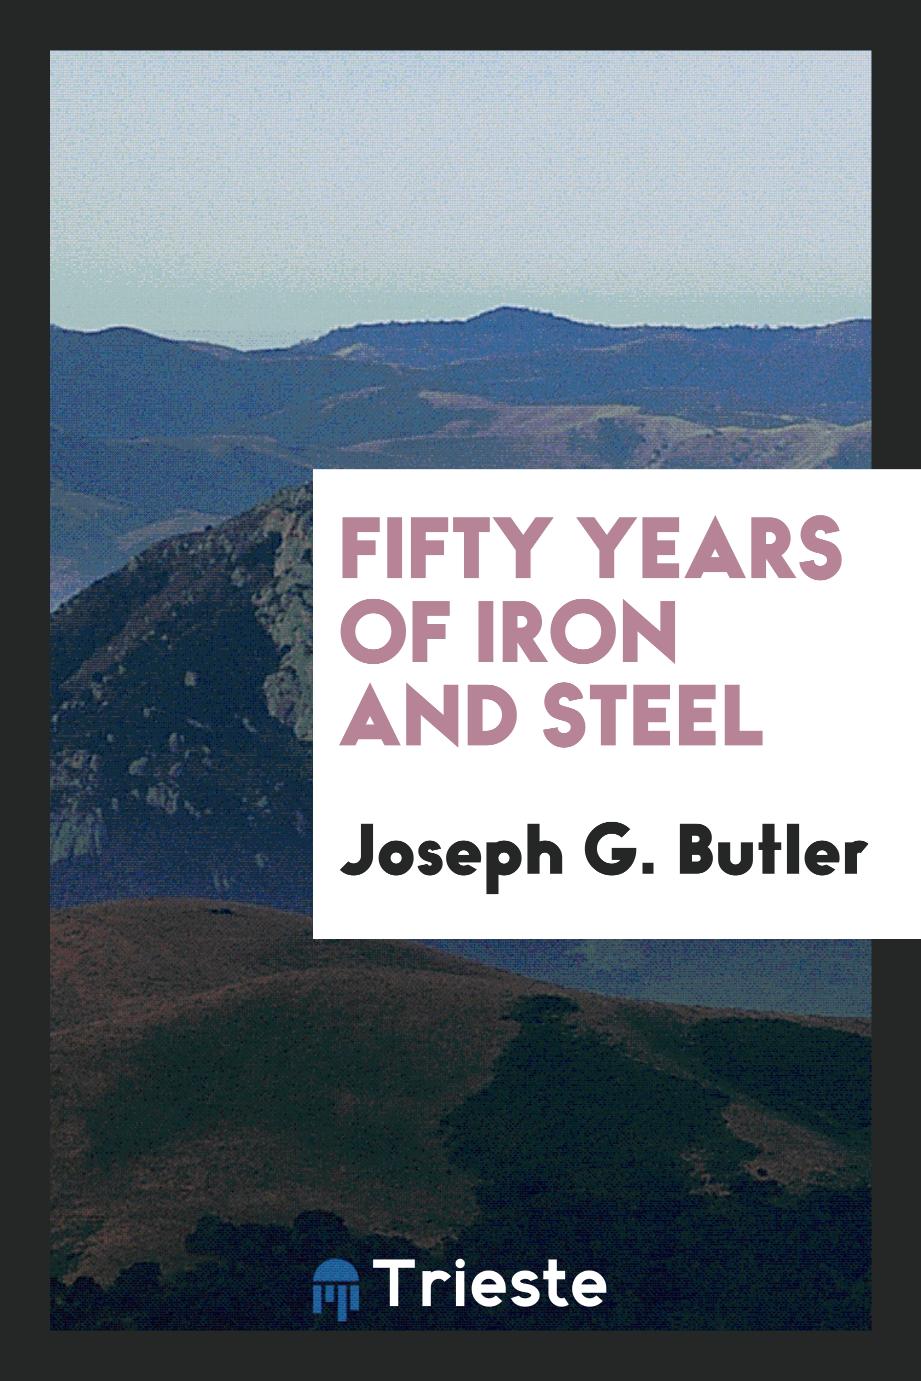 Fifty years of iron and steel